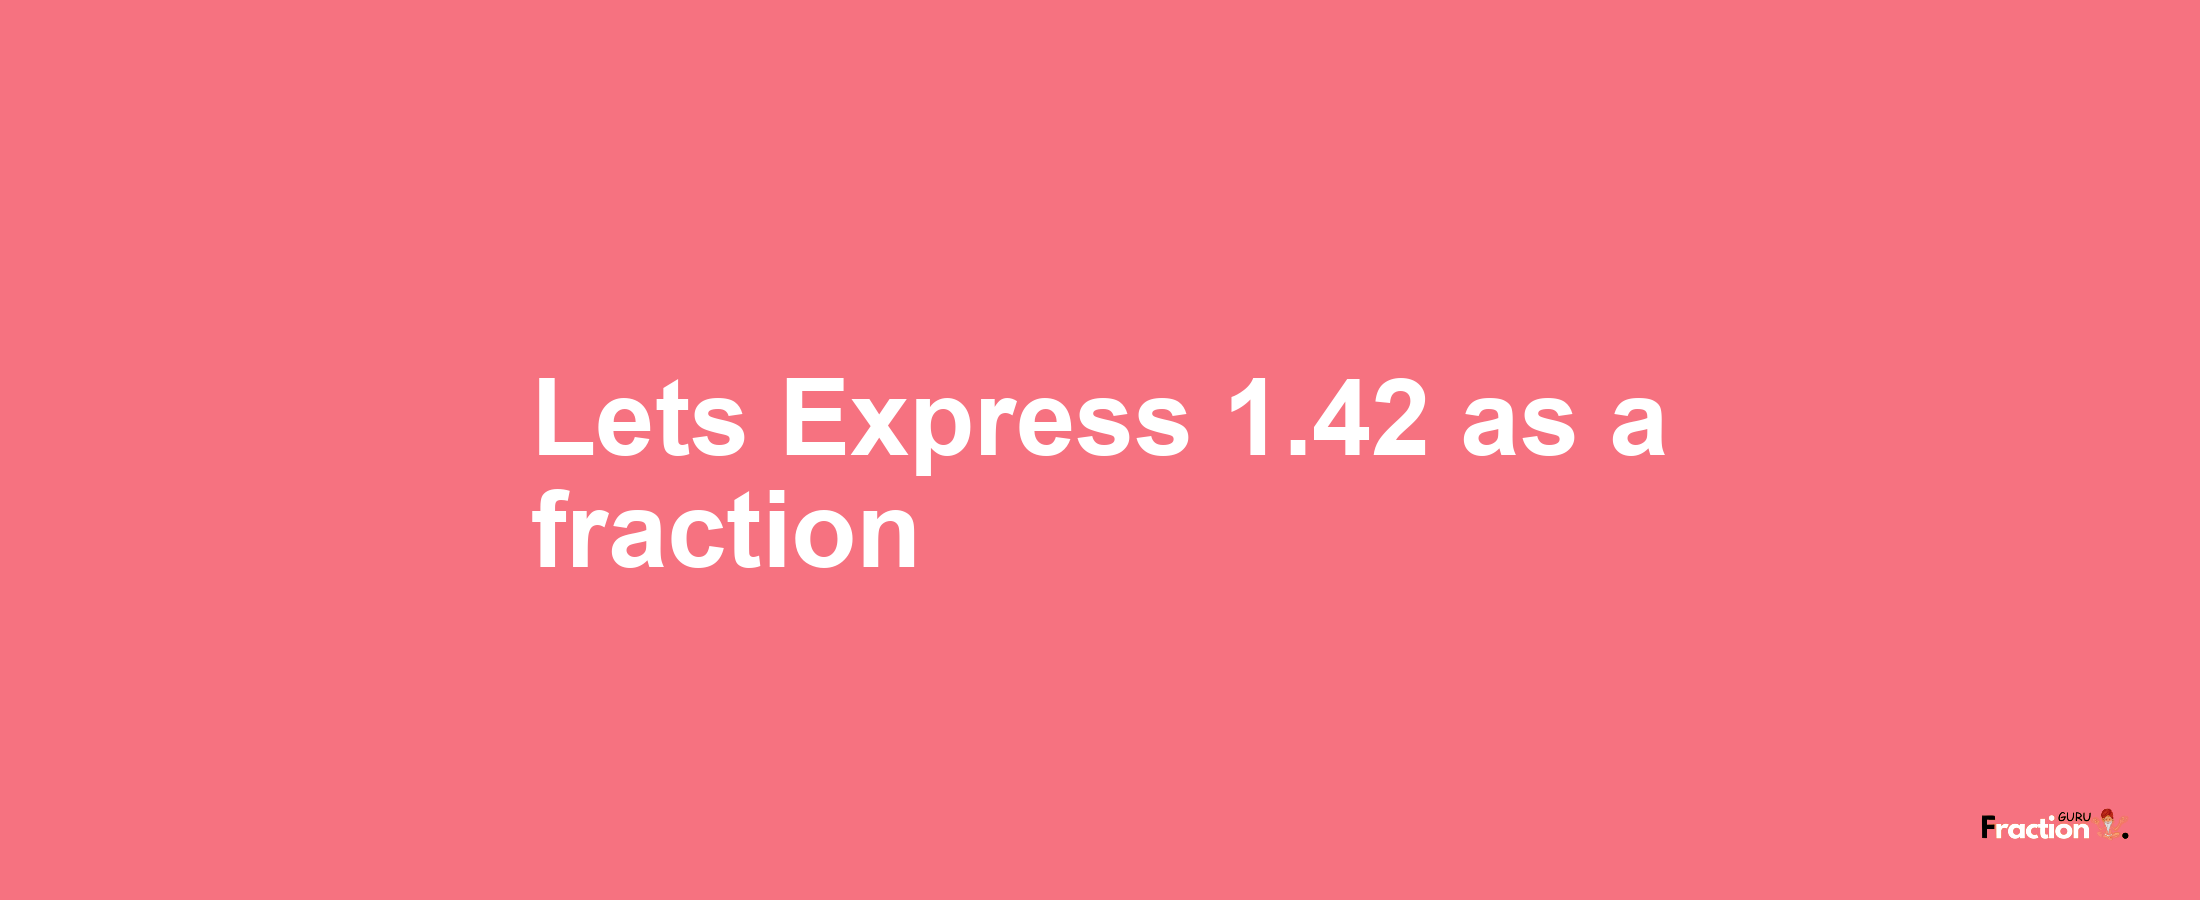 Lets Express 1.42 as afraction